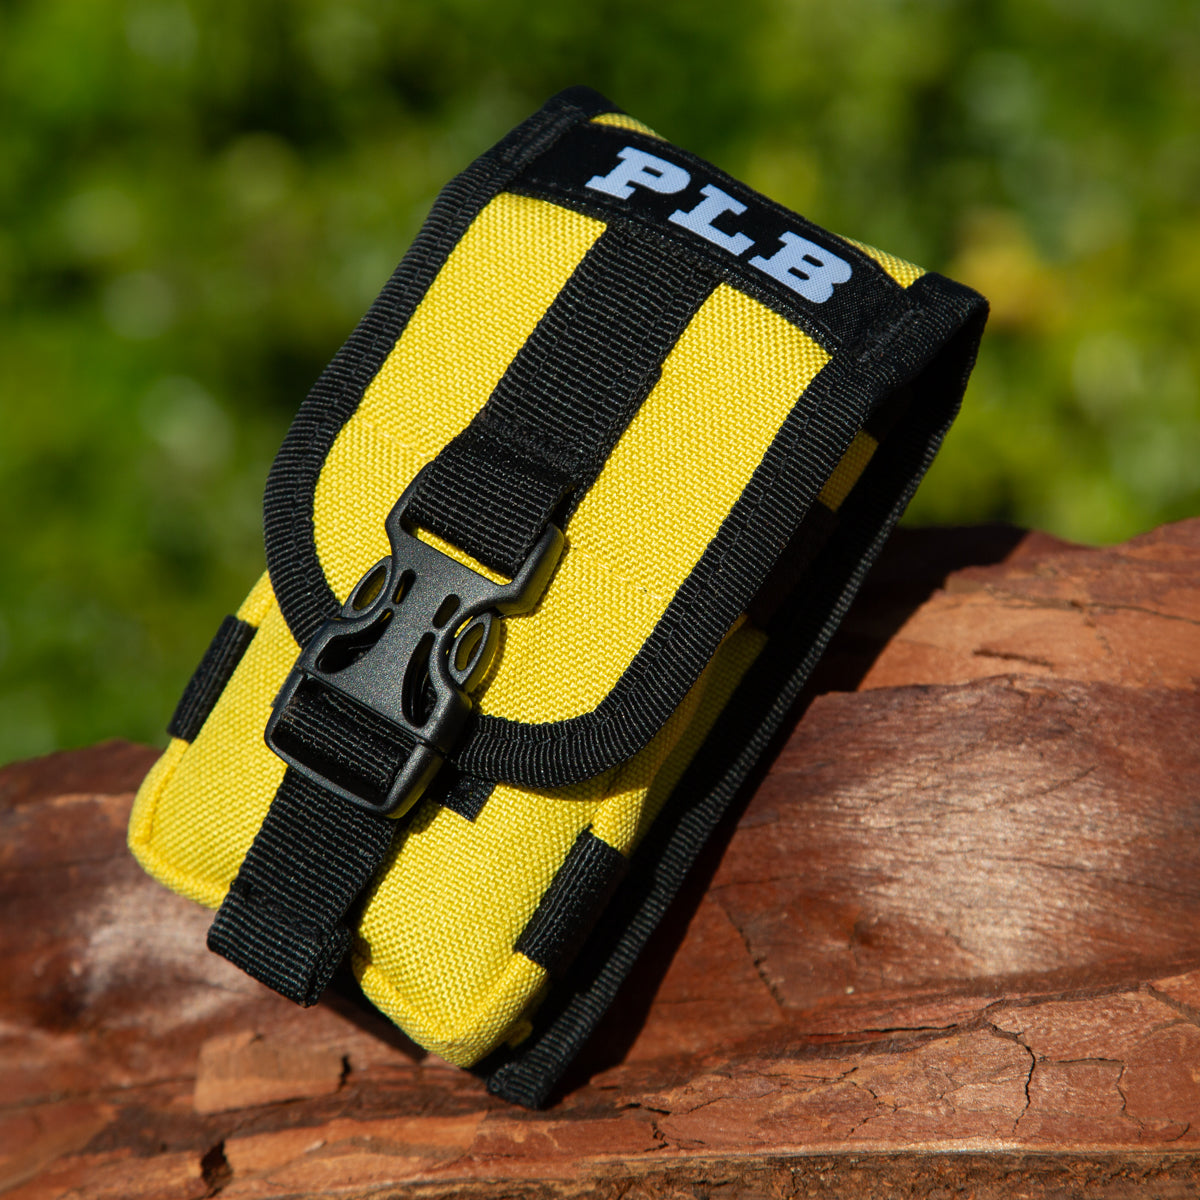 Heavy-Duty PLB Flotation Pouch: Secure & Stylish Protection for ACR Personal Locator Beacons